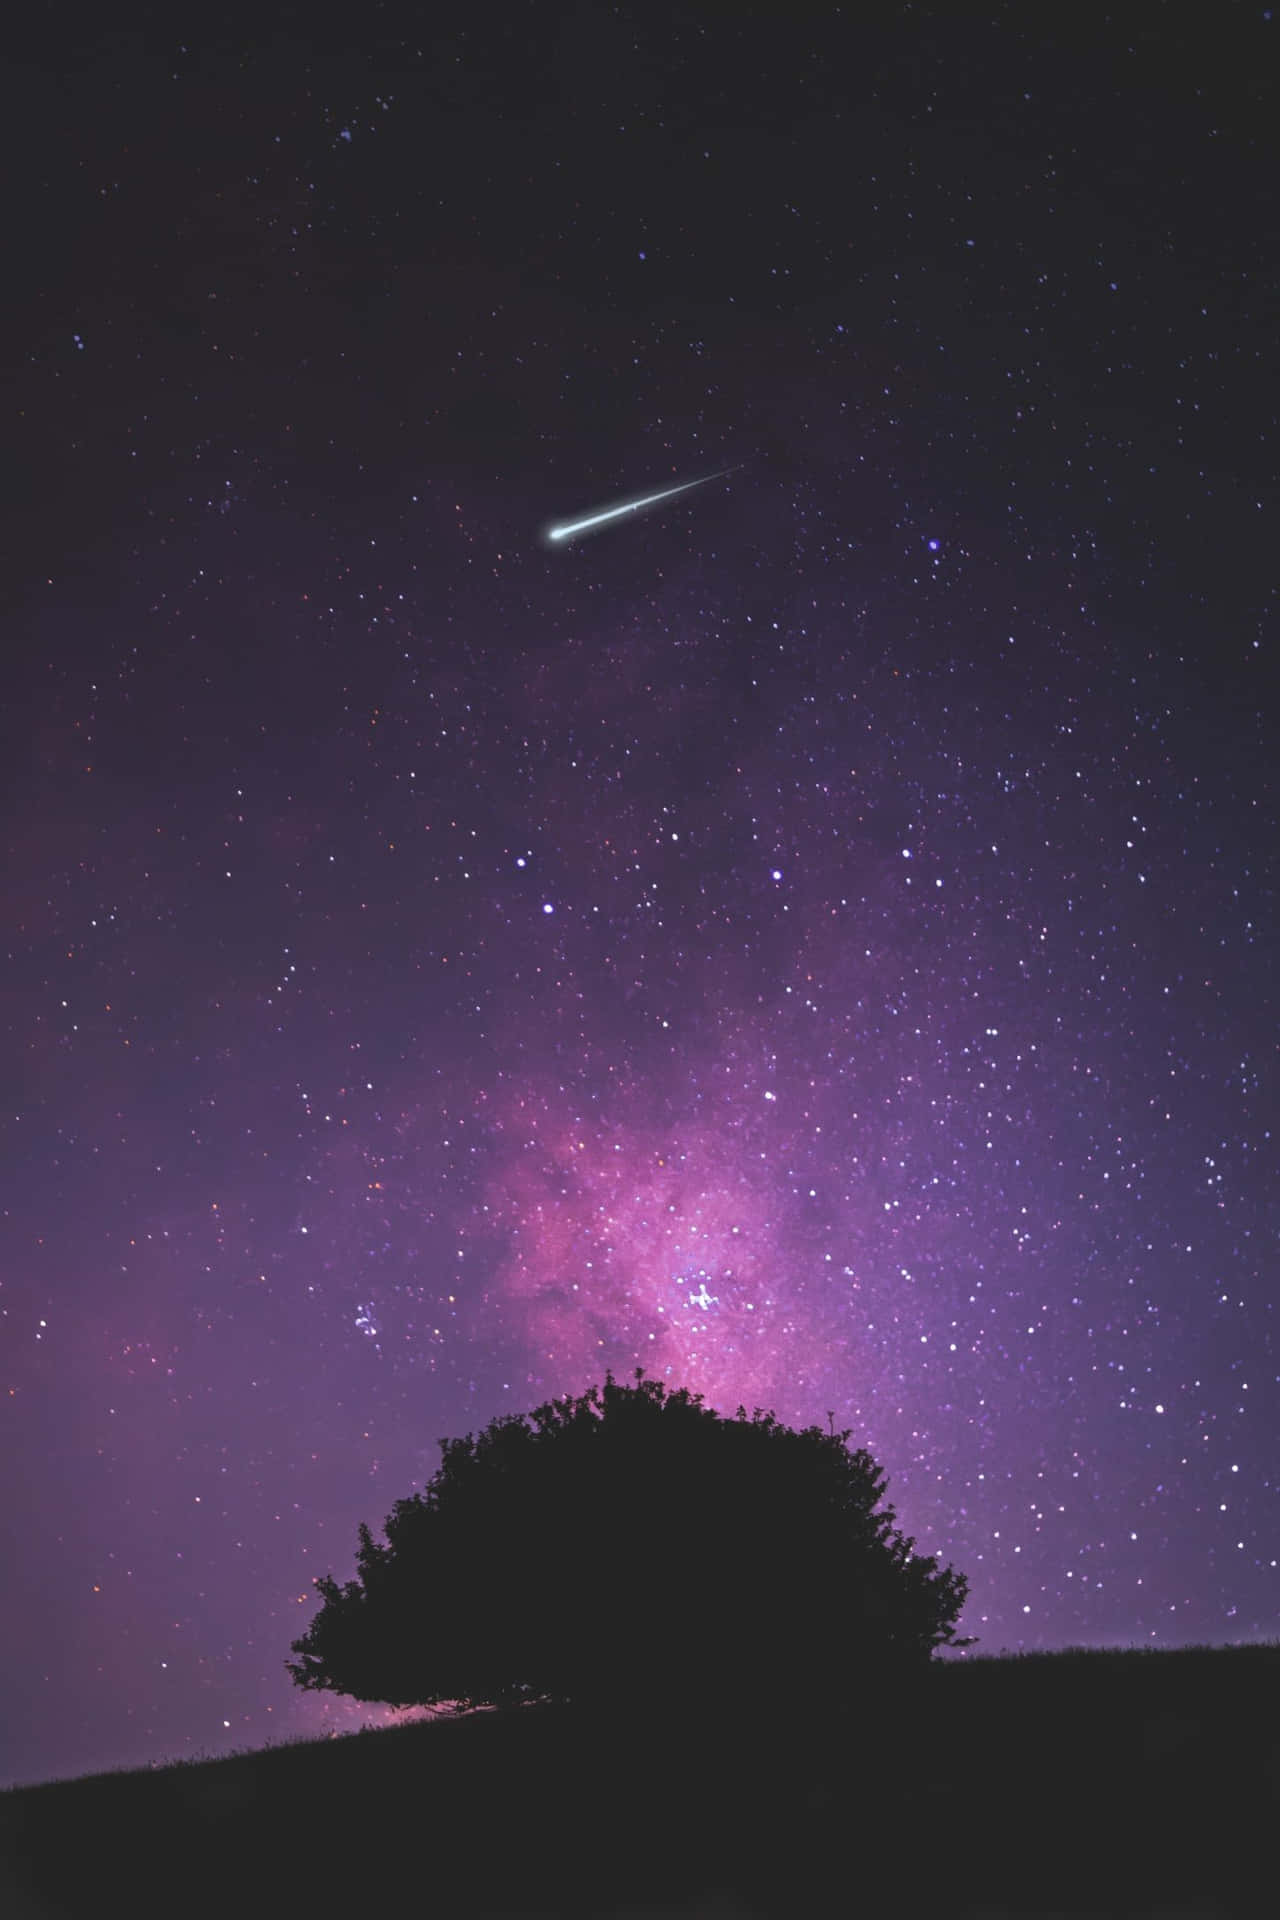 Magical Night Sky With Shooting Star Passing Through